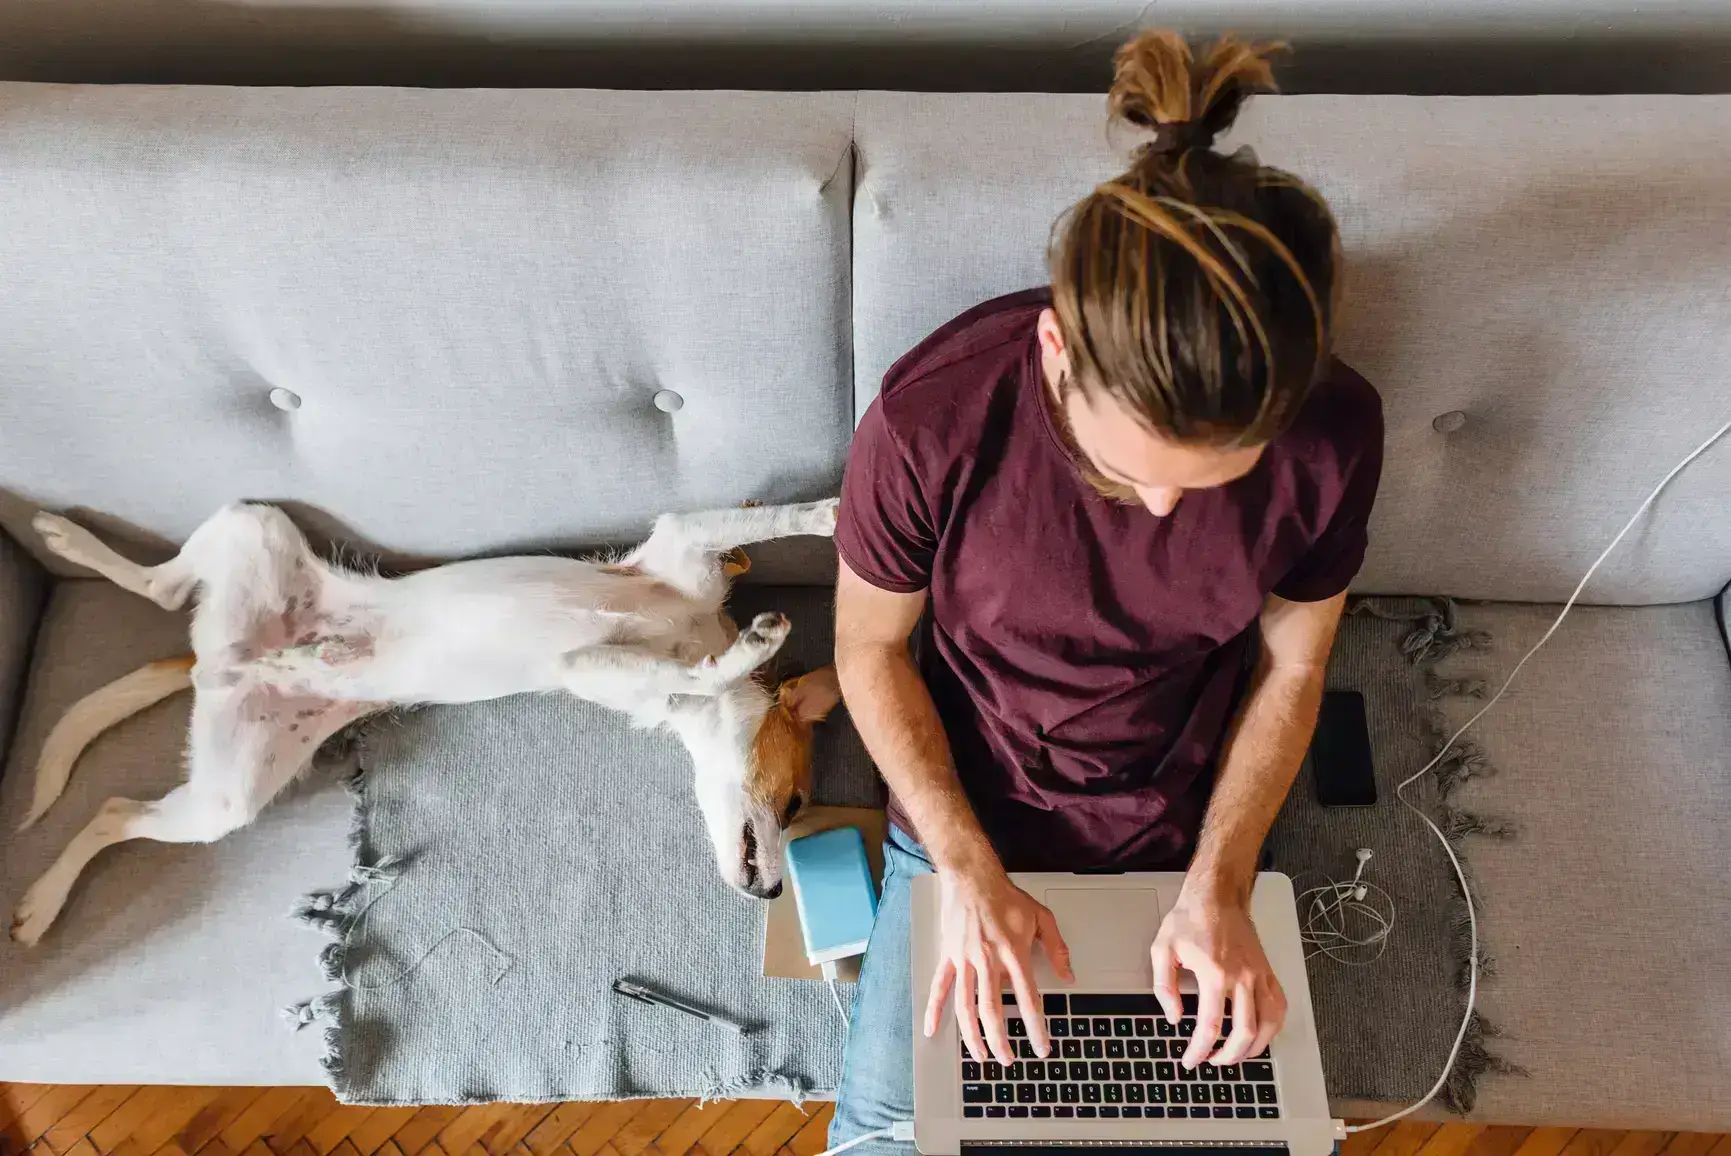 A man works on his laptop while his dog lies next to him on his back